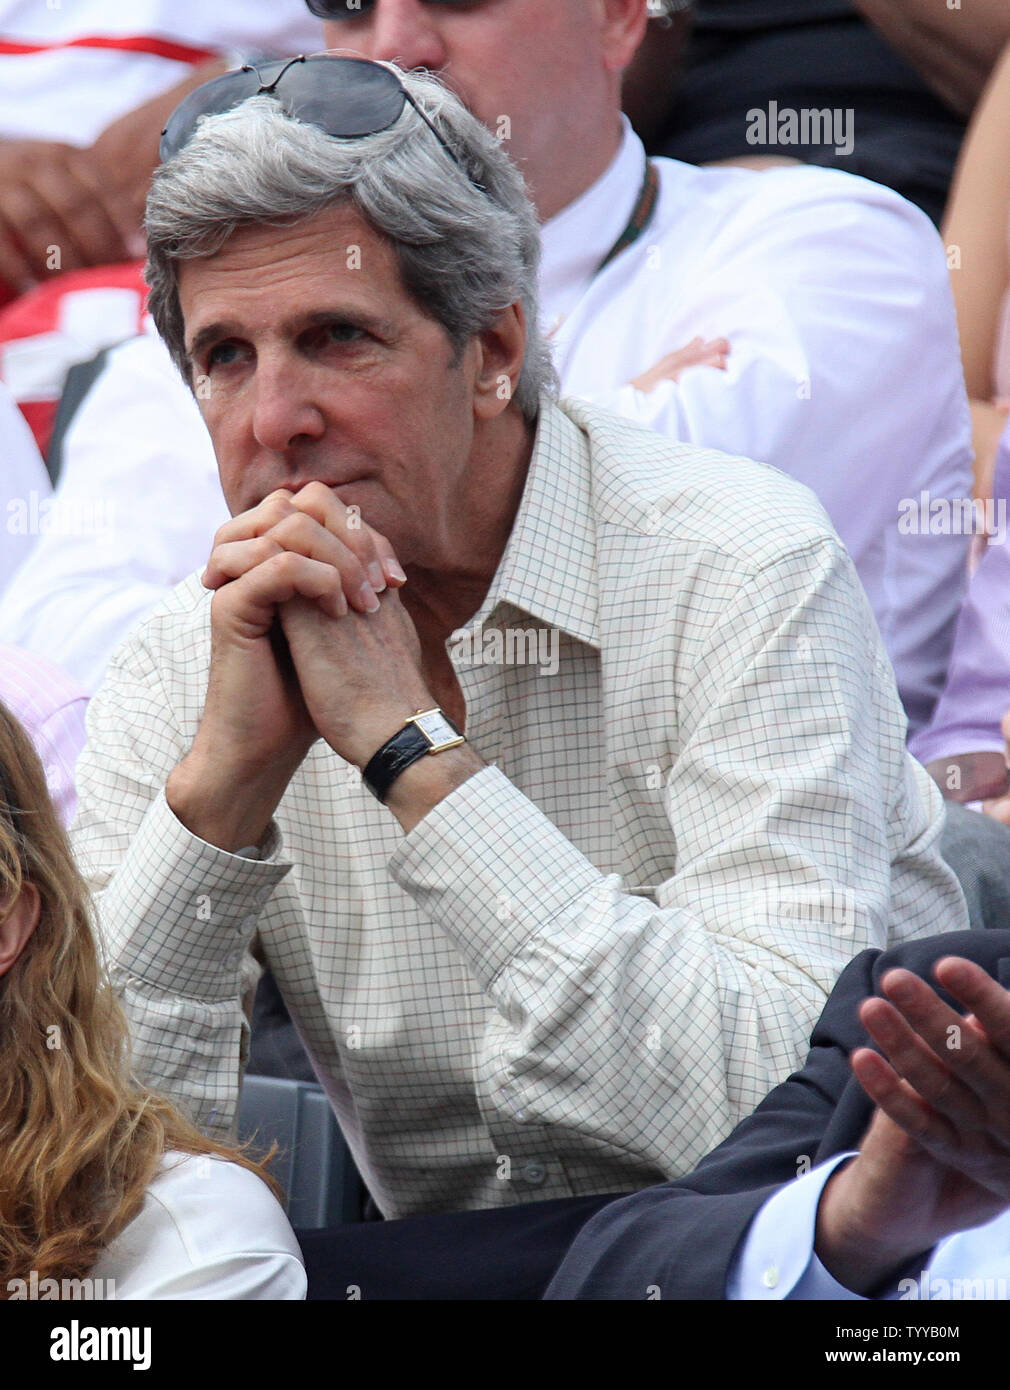 US Senator John Kerry watches the French Open mens final match between Spaniard Rafael Nadal and Roger Federer of Switzerland at Roland Garros in Paris on June 5, 2011